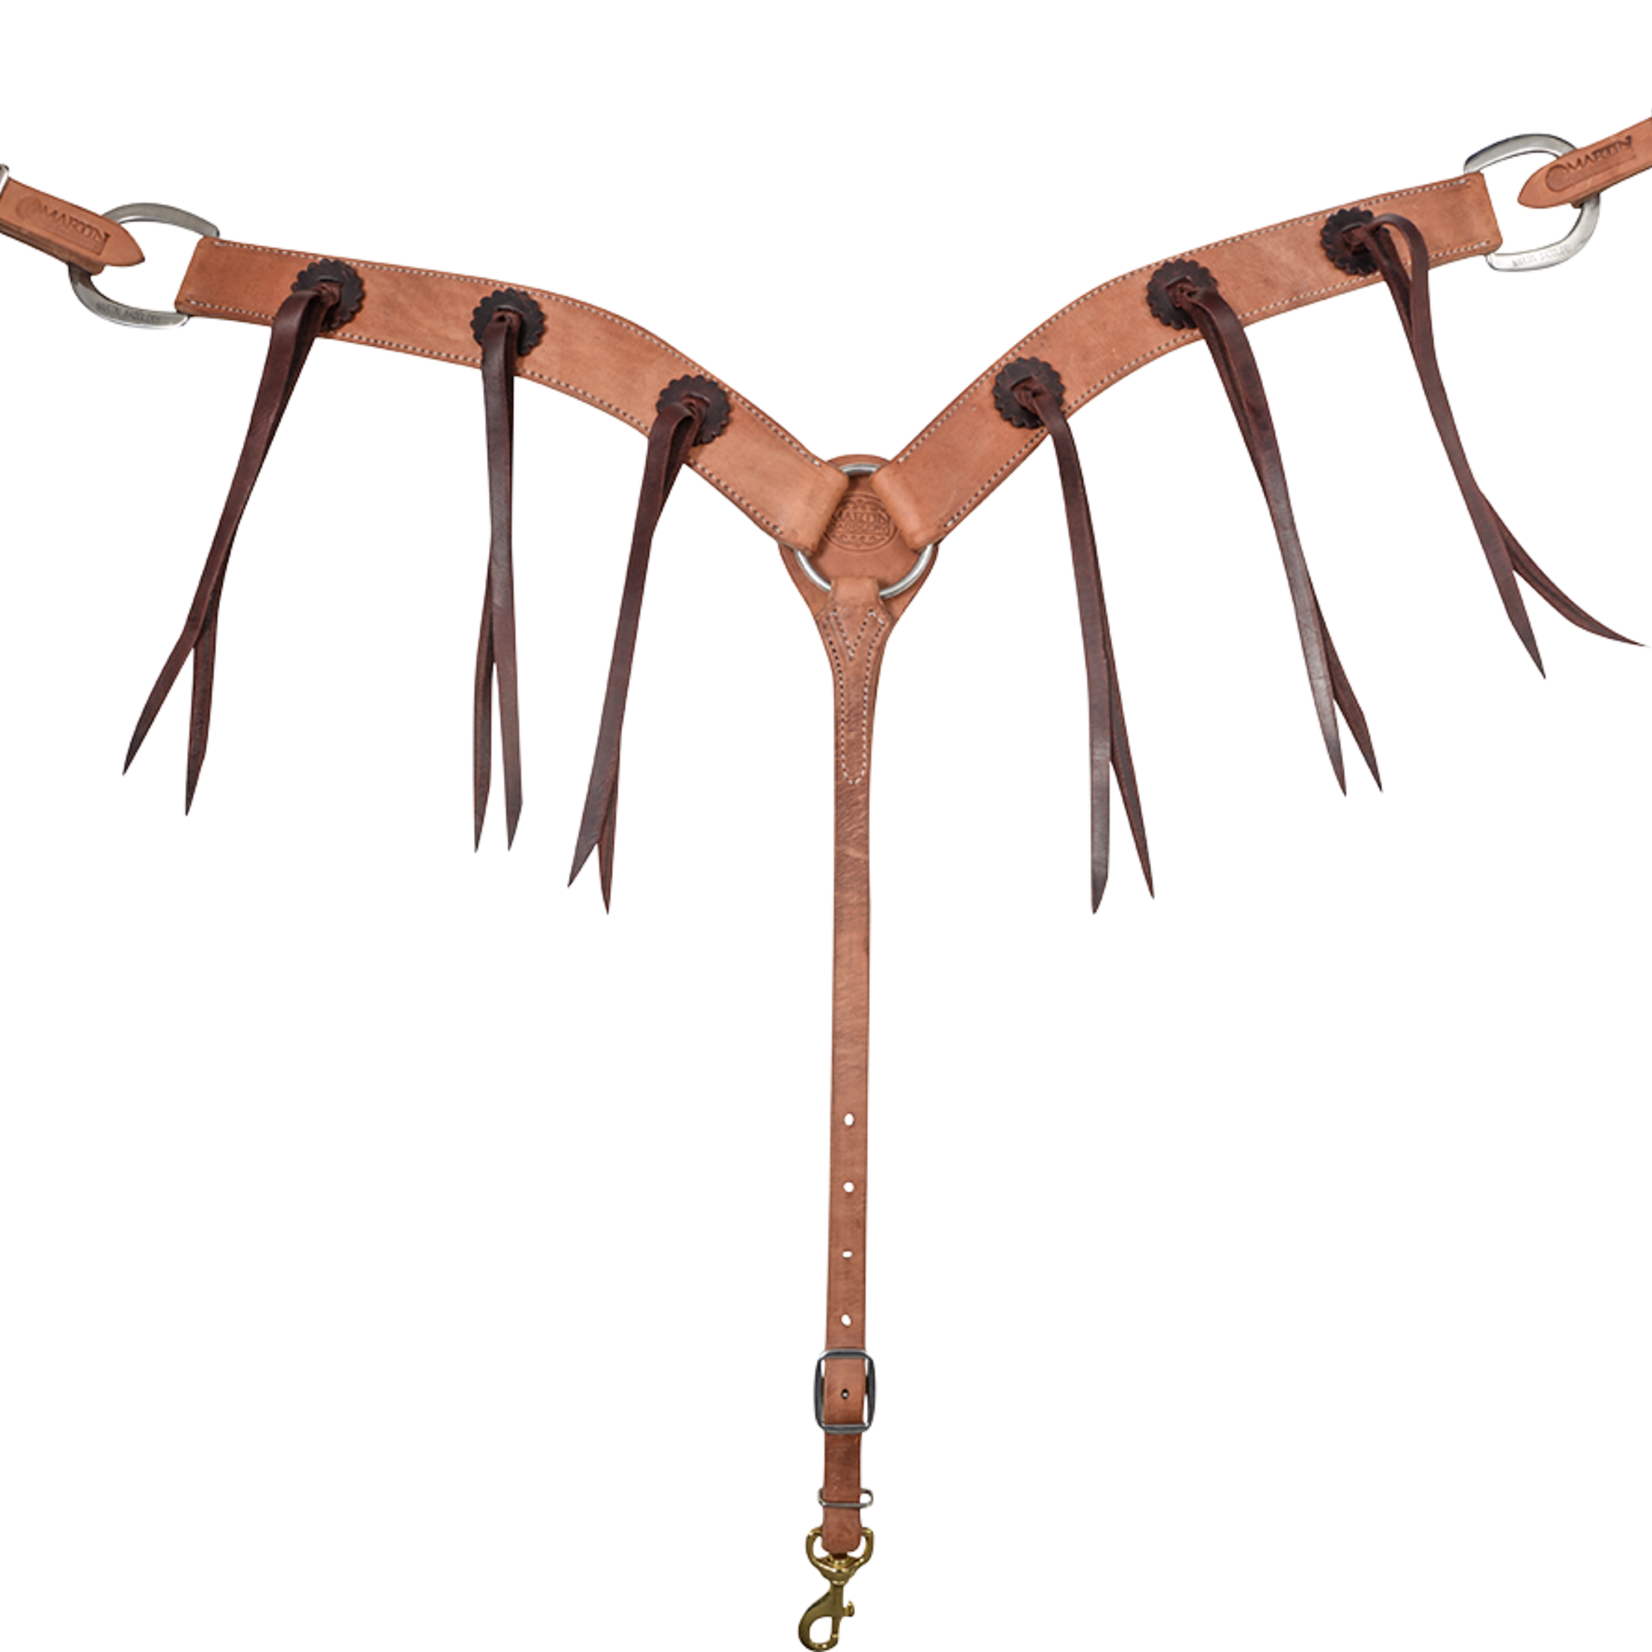 Martin Saddlery Harness with Rosettes and Strings 2” Breastcollar